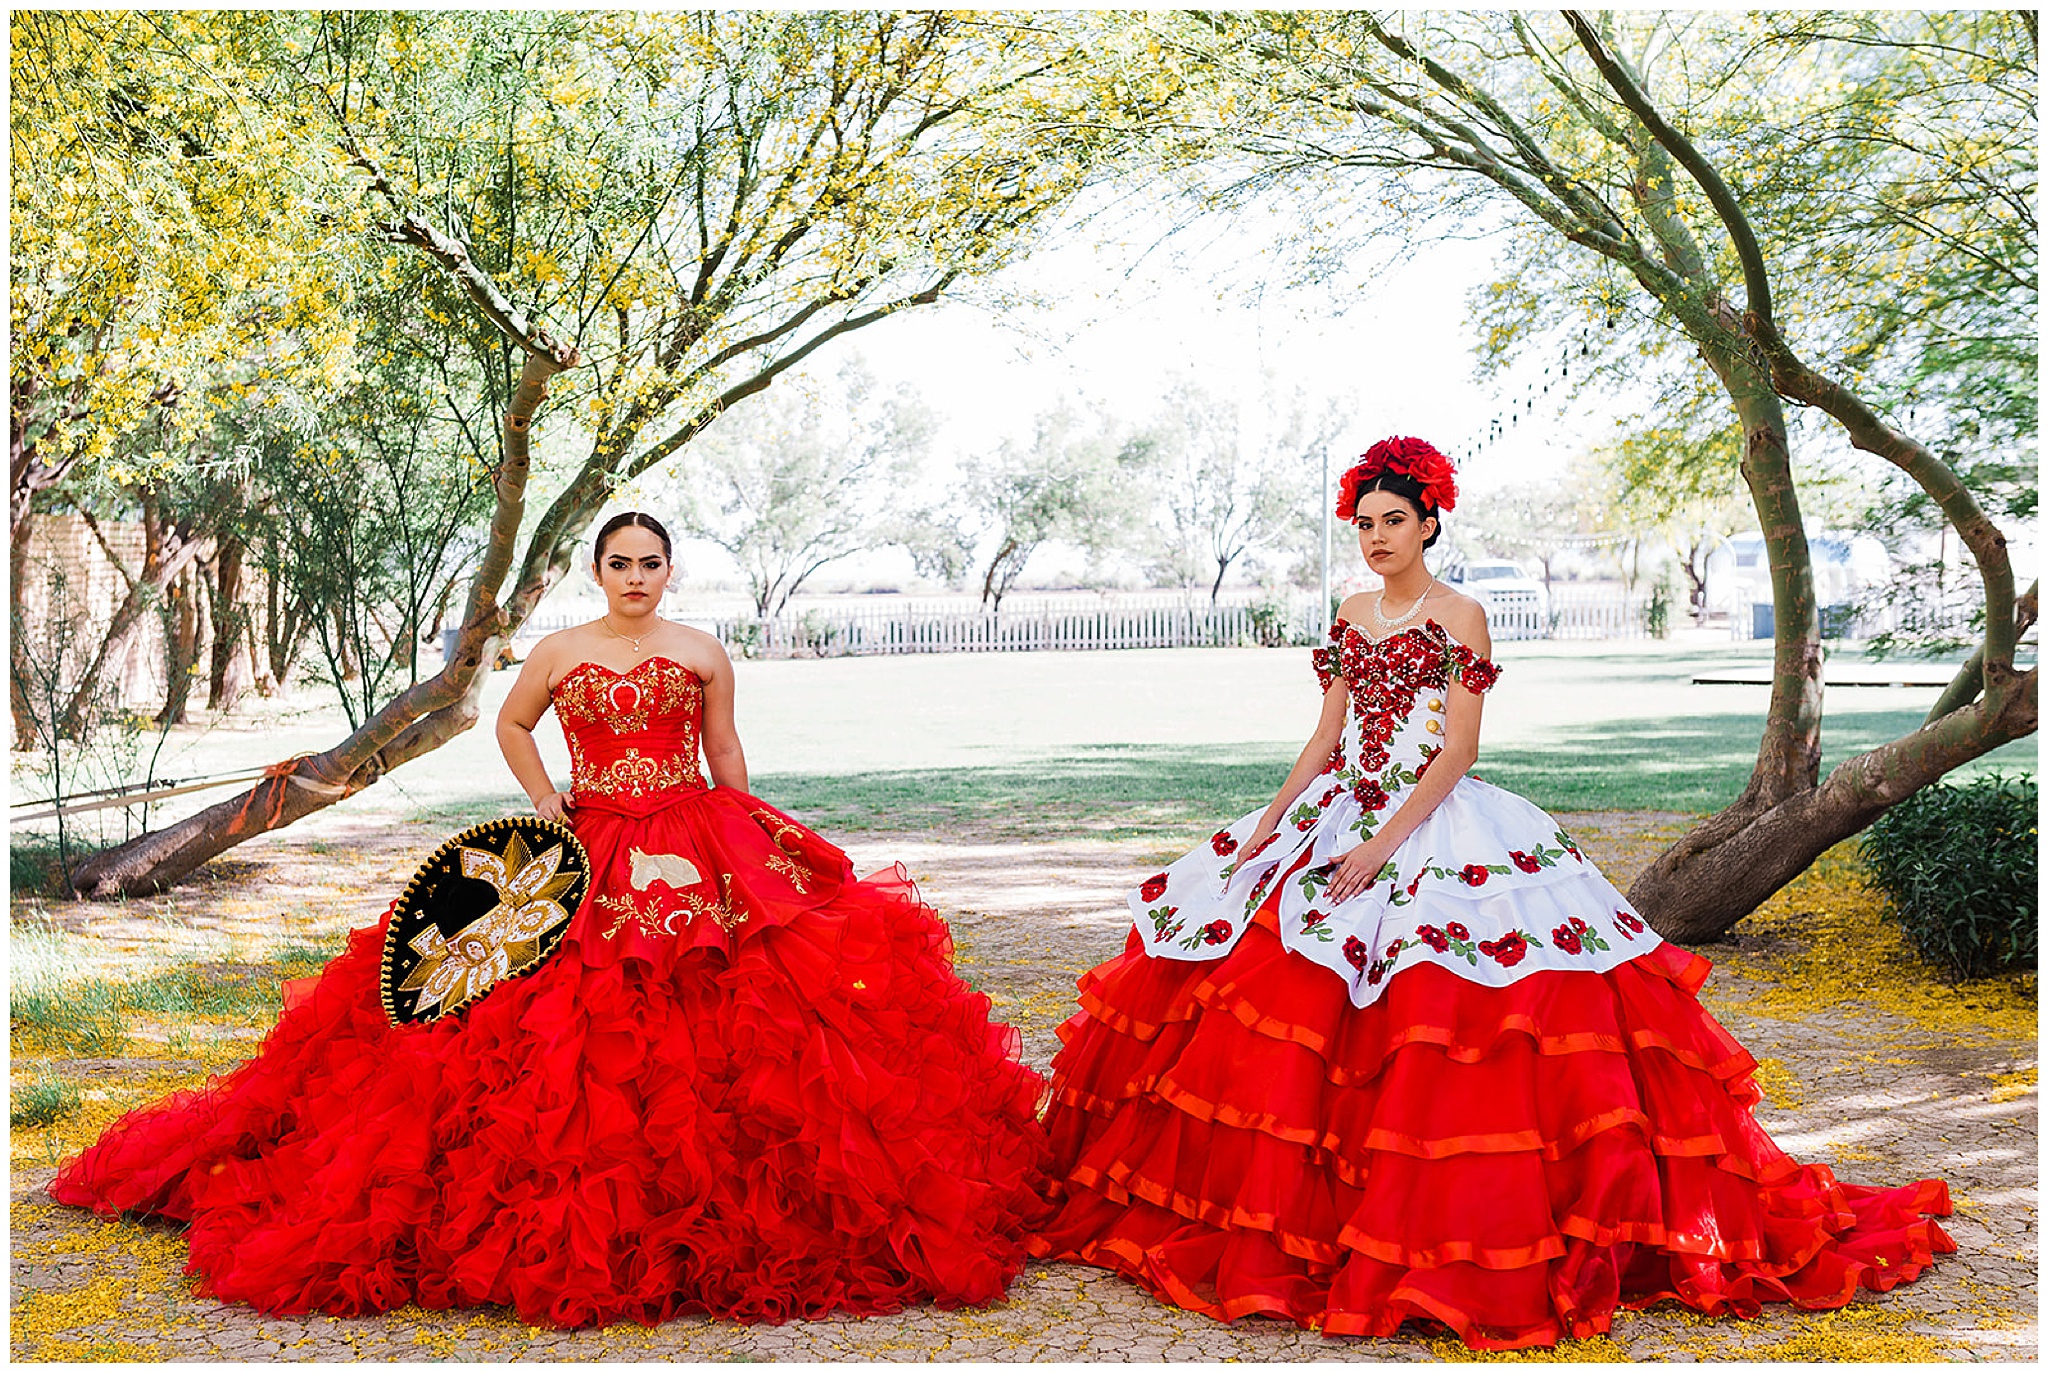 Two teenagers in large Quinceaneras gowns stand under trees with yellow flowers